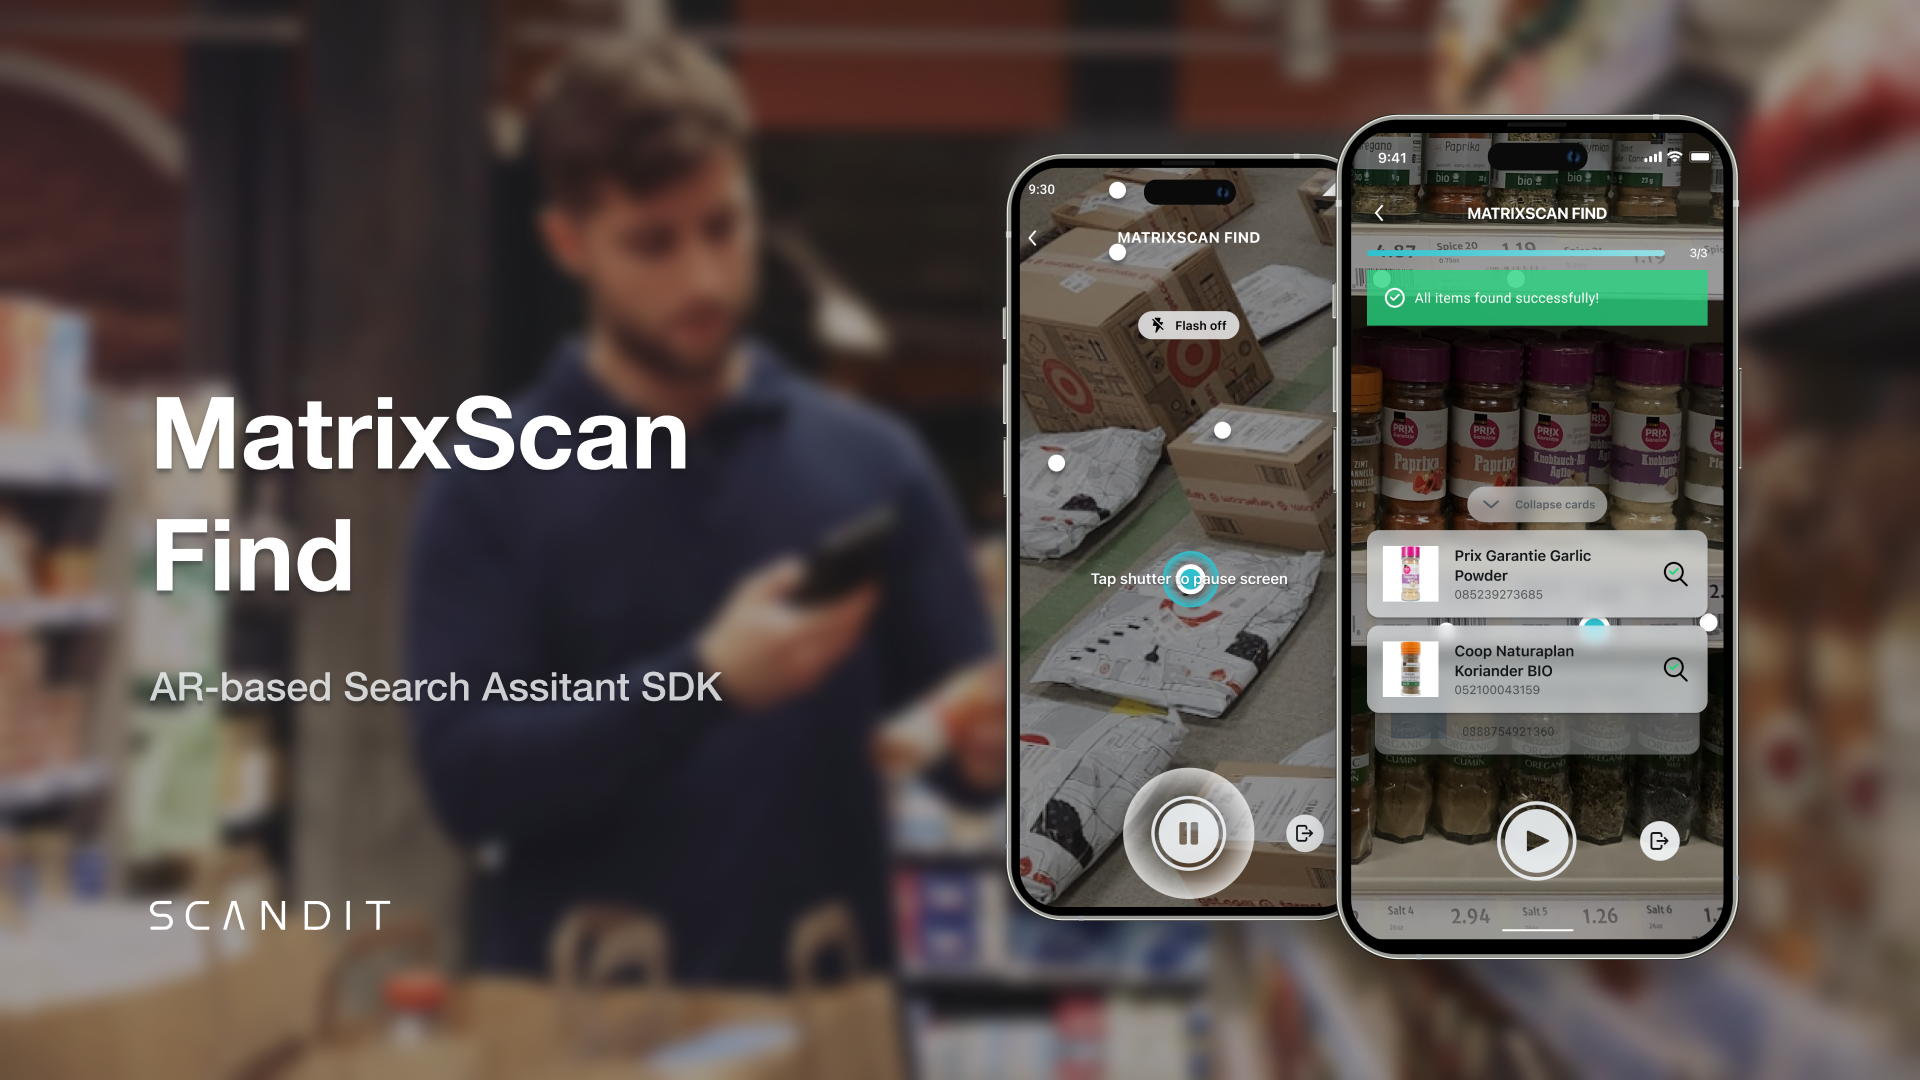 MatrixScan Find - An AR-based Search Assistance